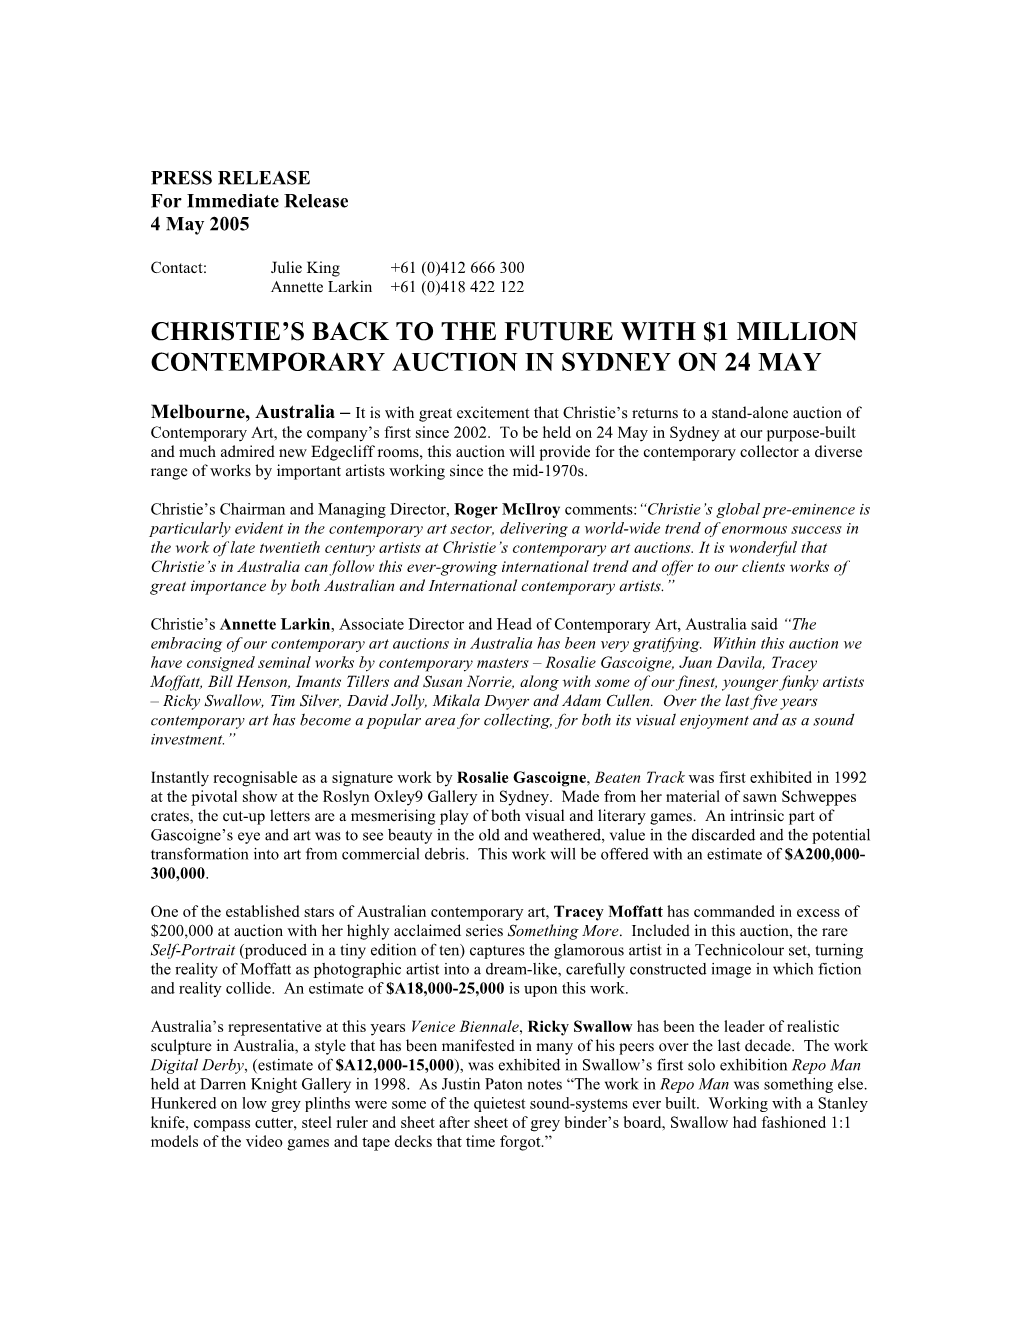 Christie's Back to the Future with $1 Million